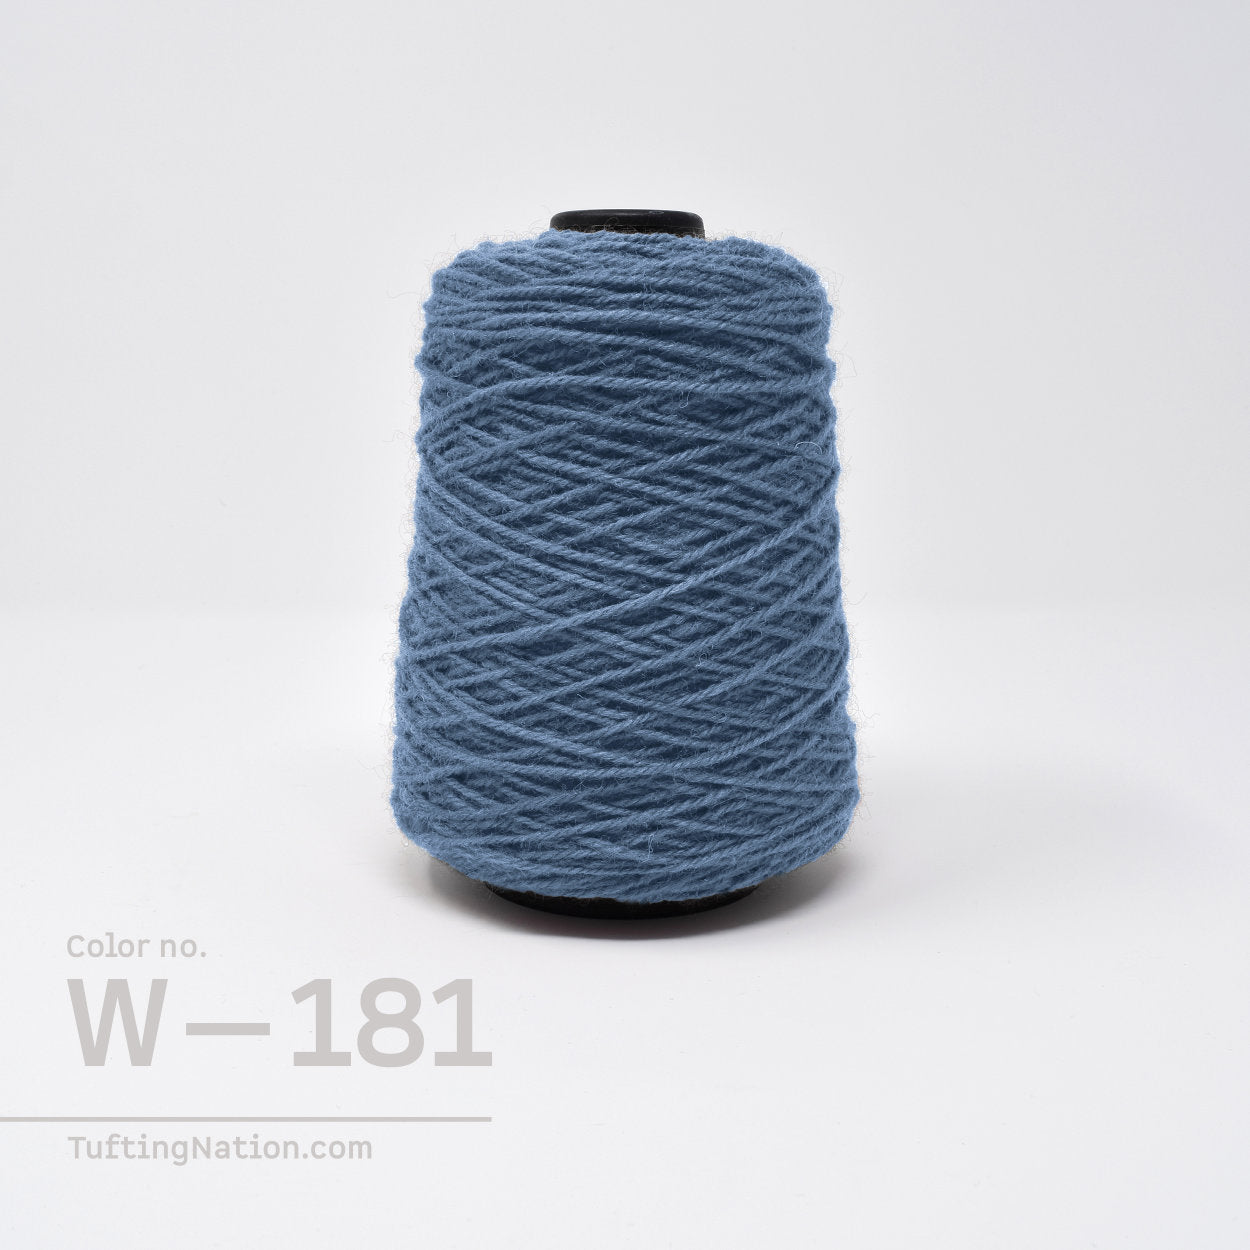 Blue Rug Wool Yarn on cones for Rug Tufting, Weaving and Punch Needle | TuftingNation